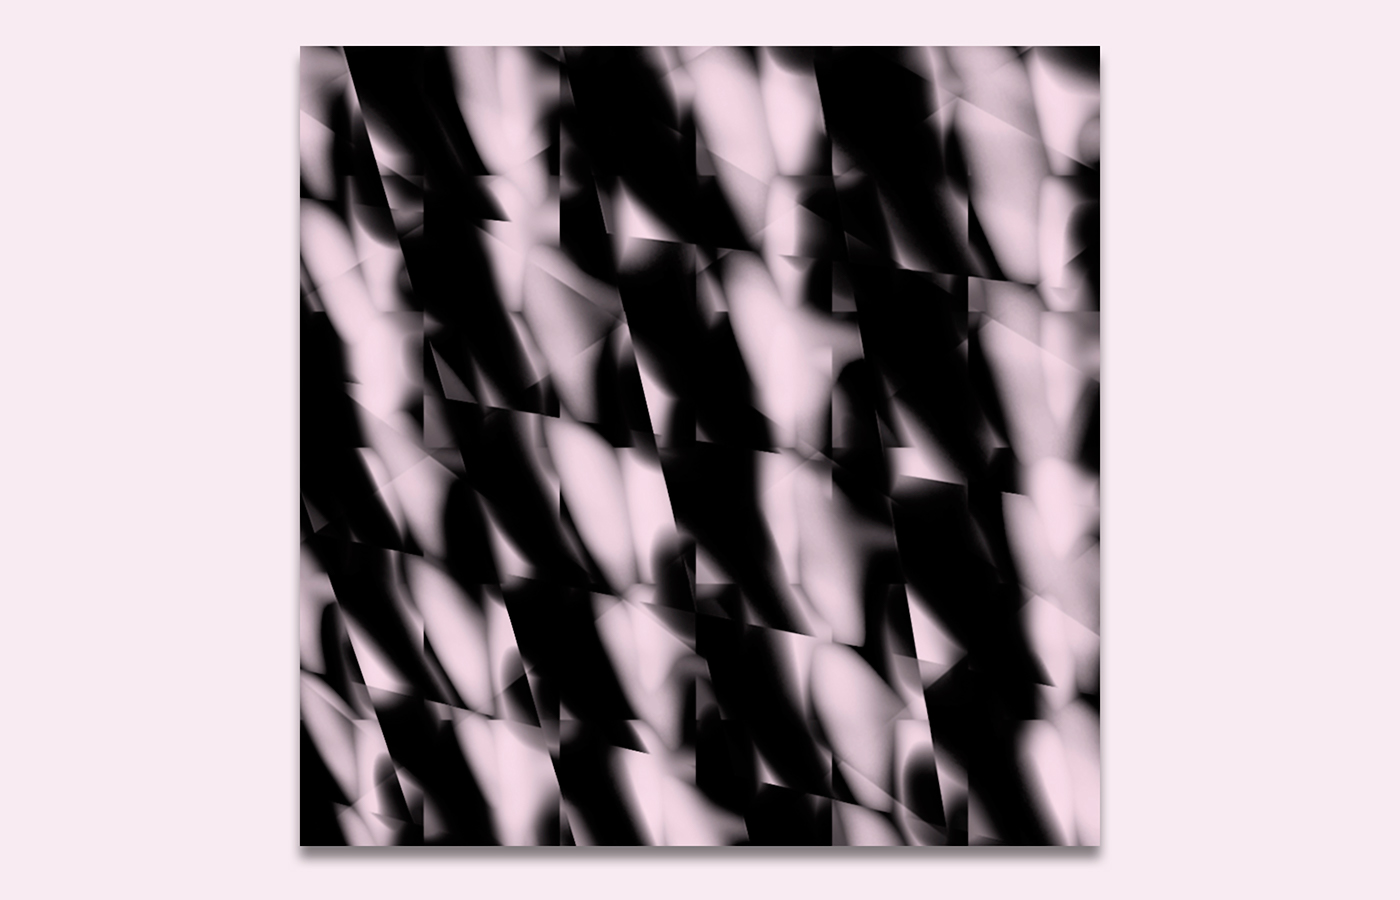 moire patterns Abstracts overlays grids